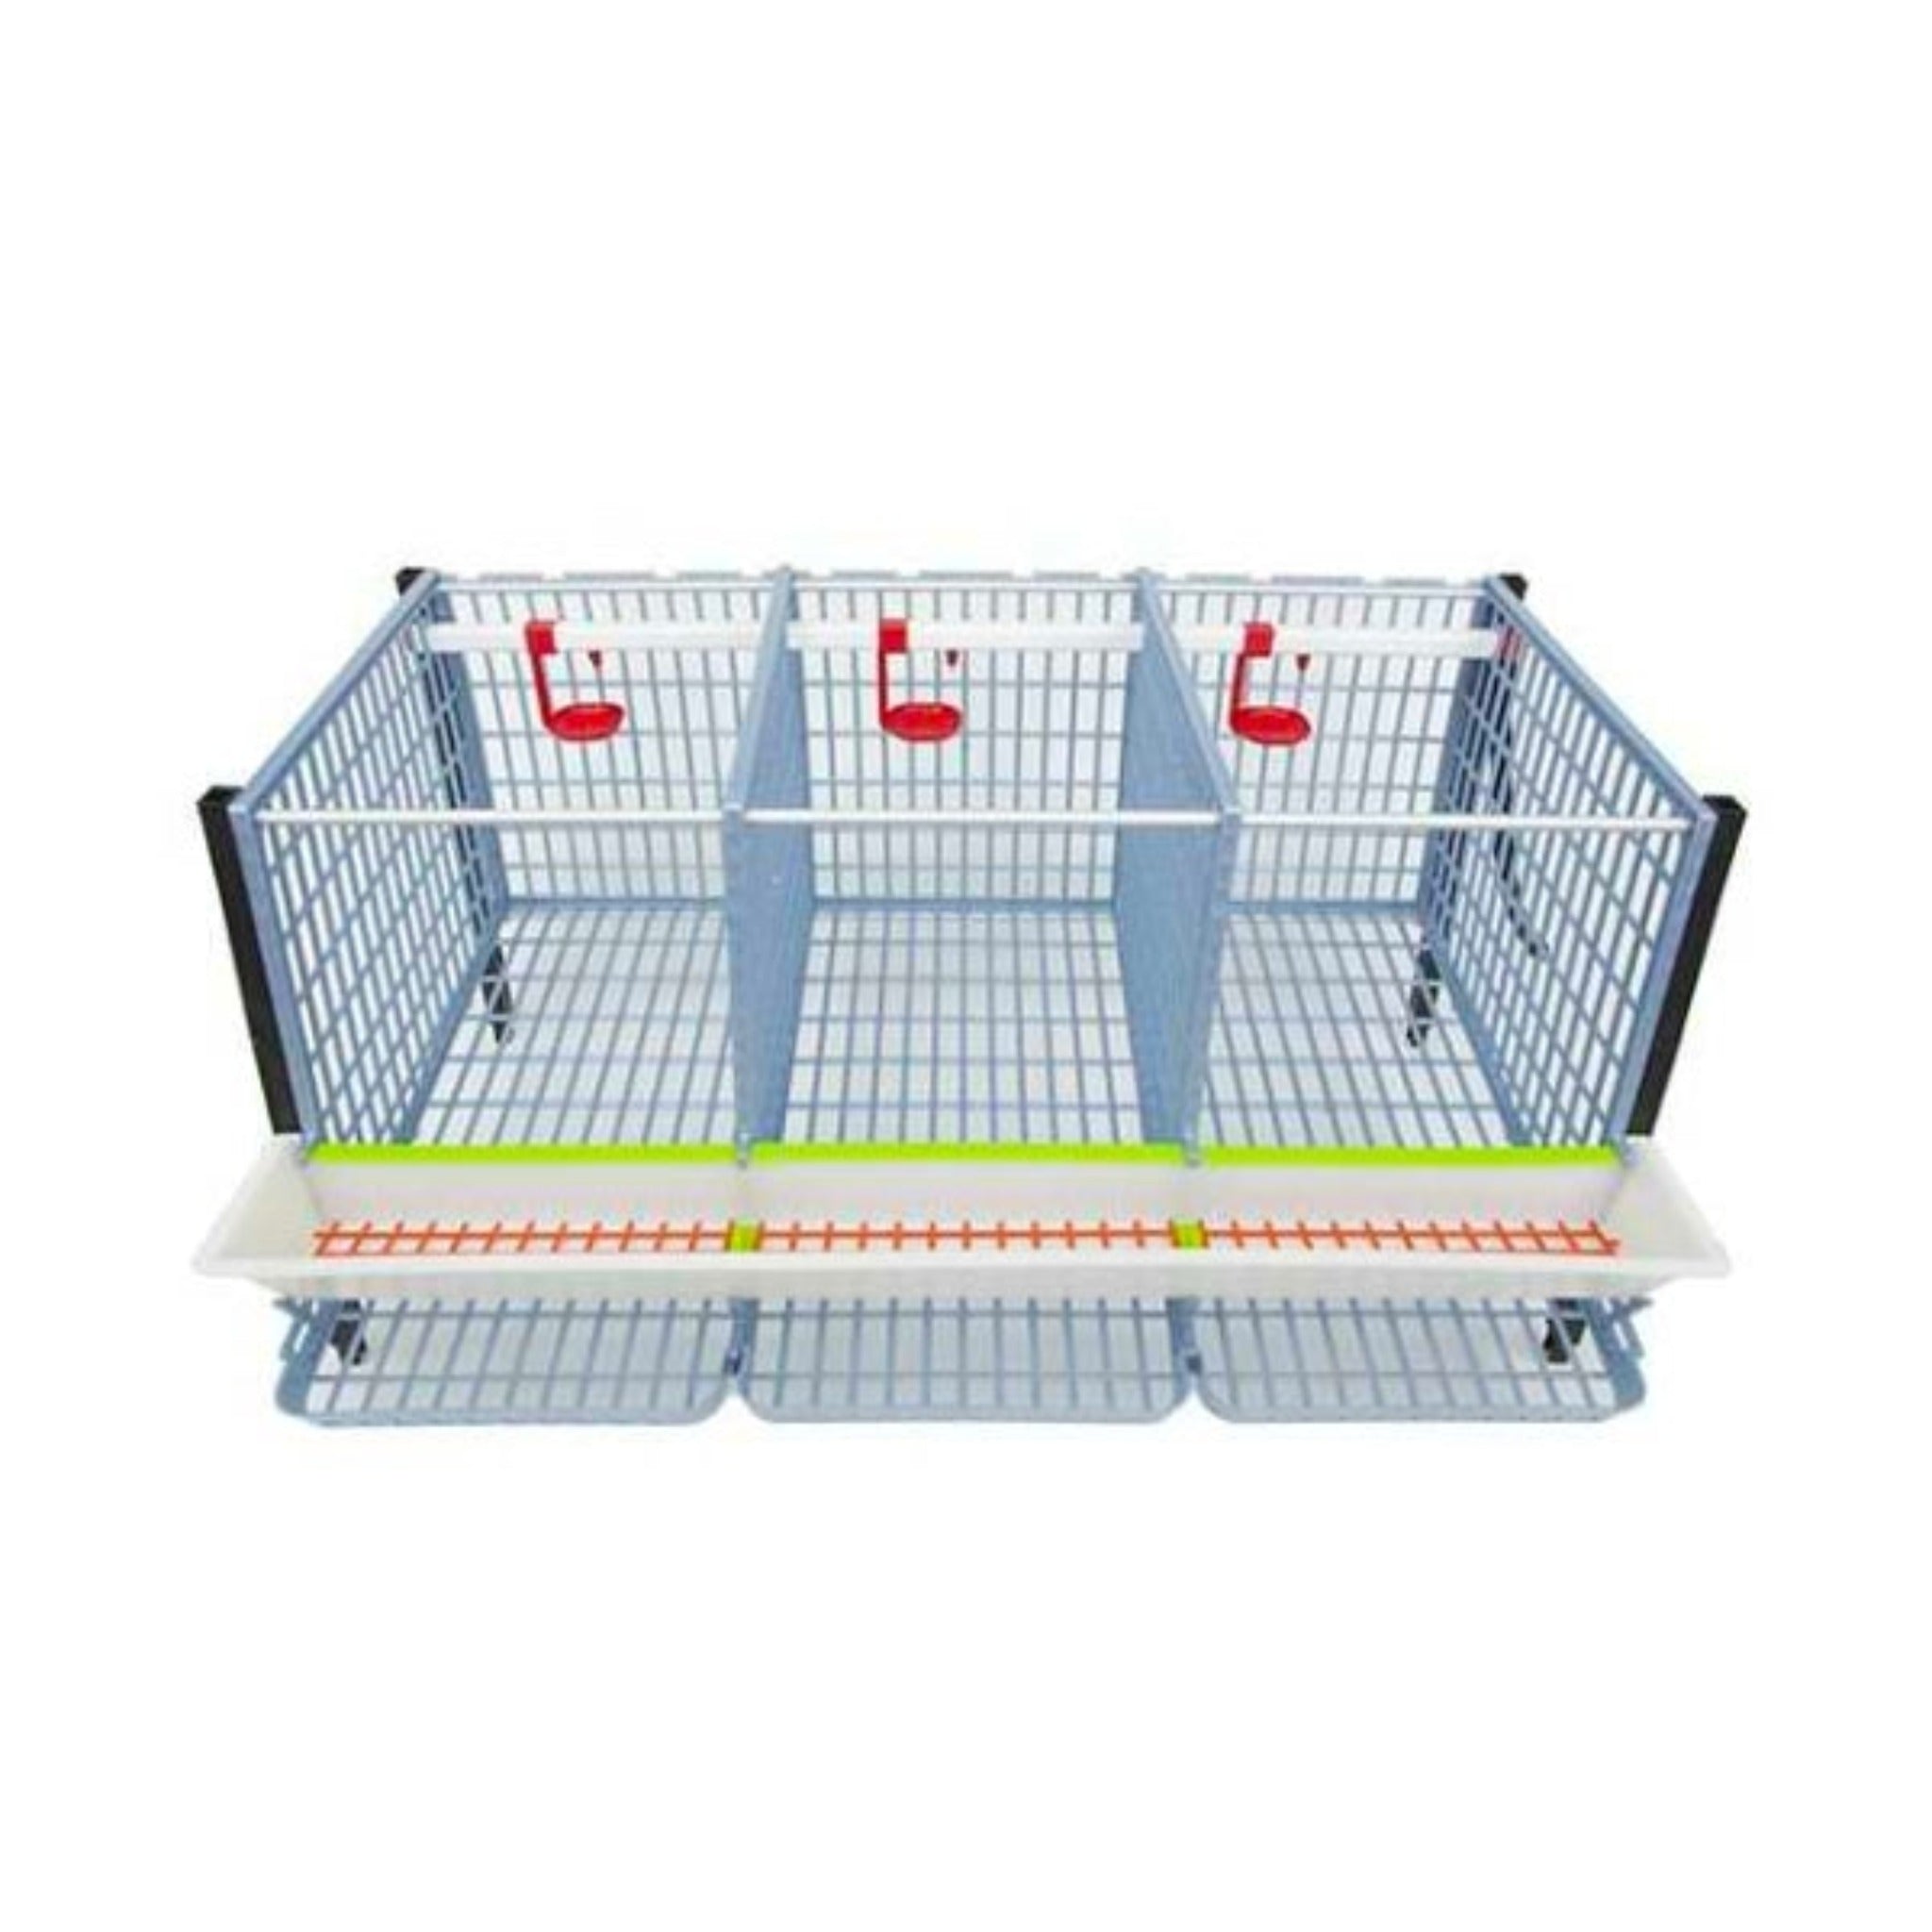 Hatching Time Cimuka. TYK40 15” Chicken cage 1 layer. Image shows chicken cage from front and above. Roof and front walls are removed to show inside of cage. Roll out egg trays can be seen on front under feeding trough. Automatic drinker system is seen on back wall of cage.